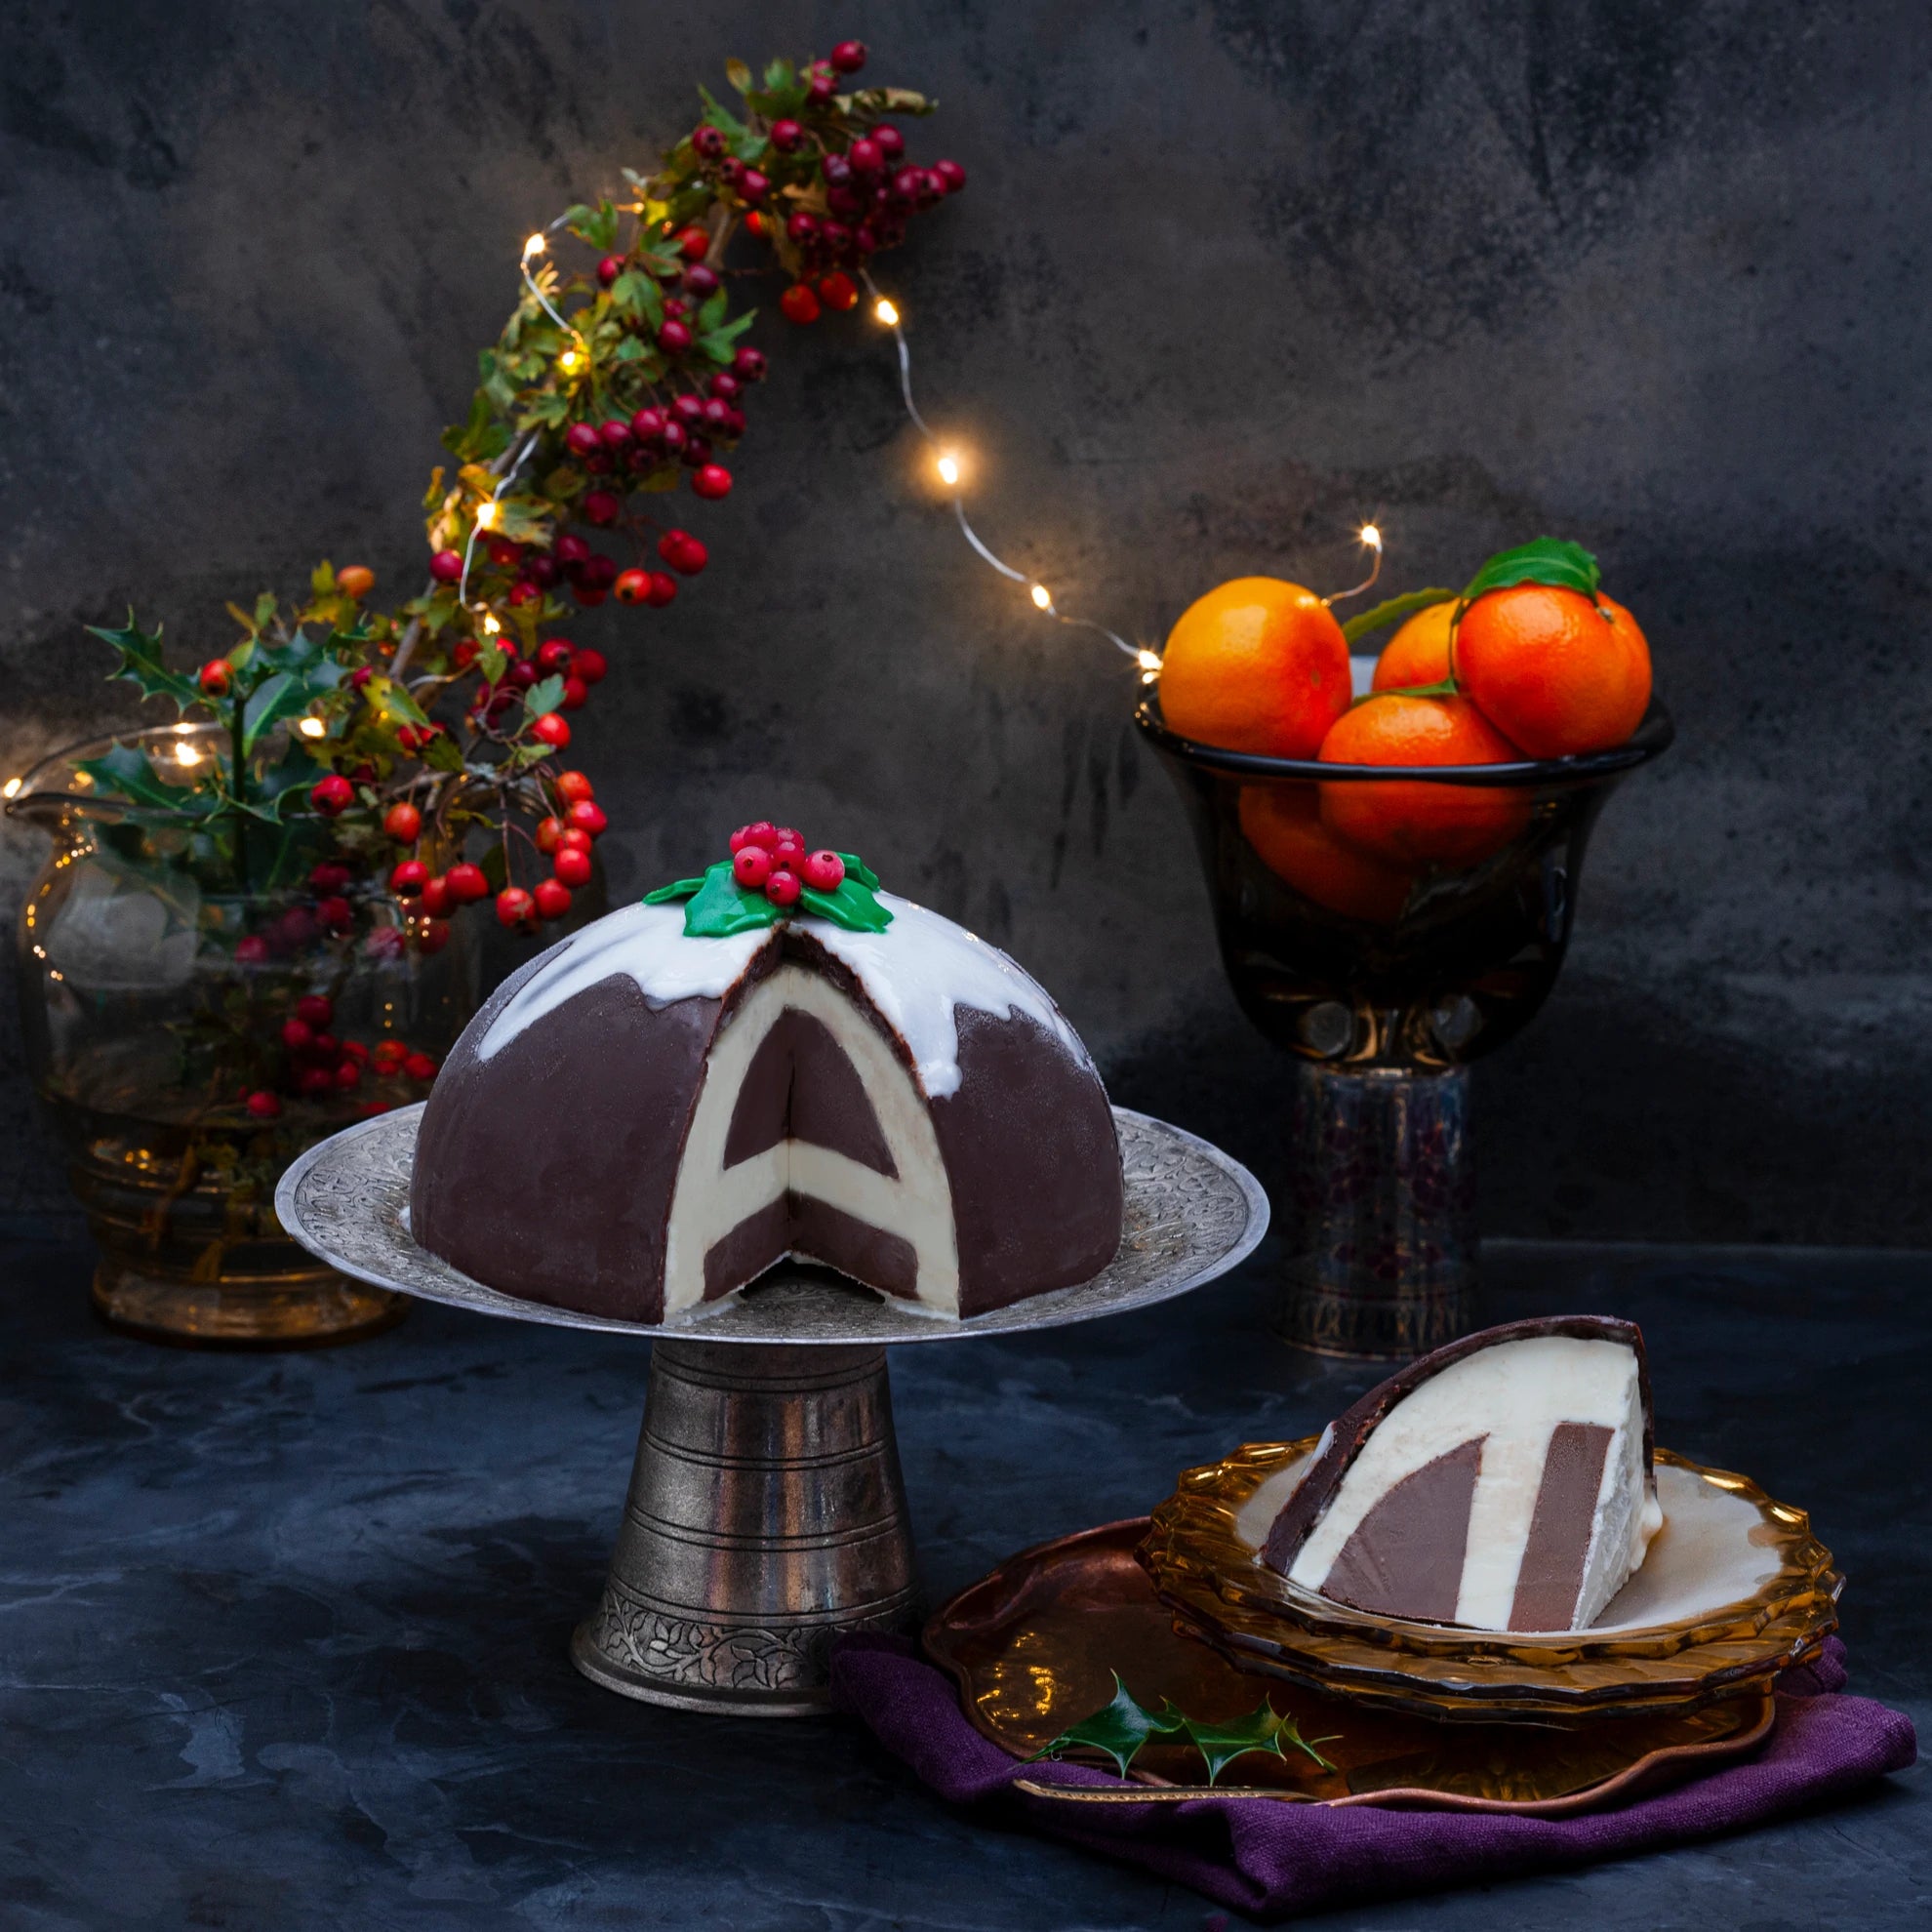 Belgian Chocolate Orange and Maxi Moo Moo ice cream bombe on a stand, with a slice on a plate.